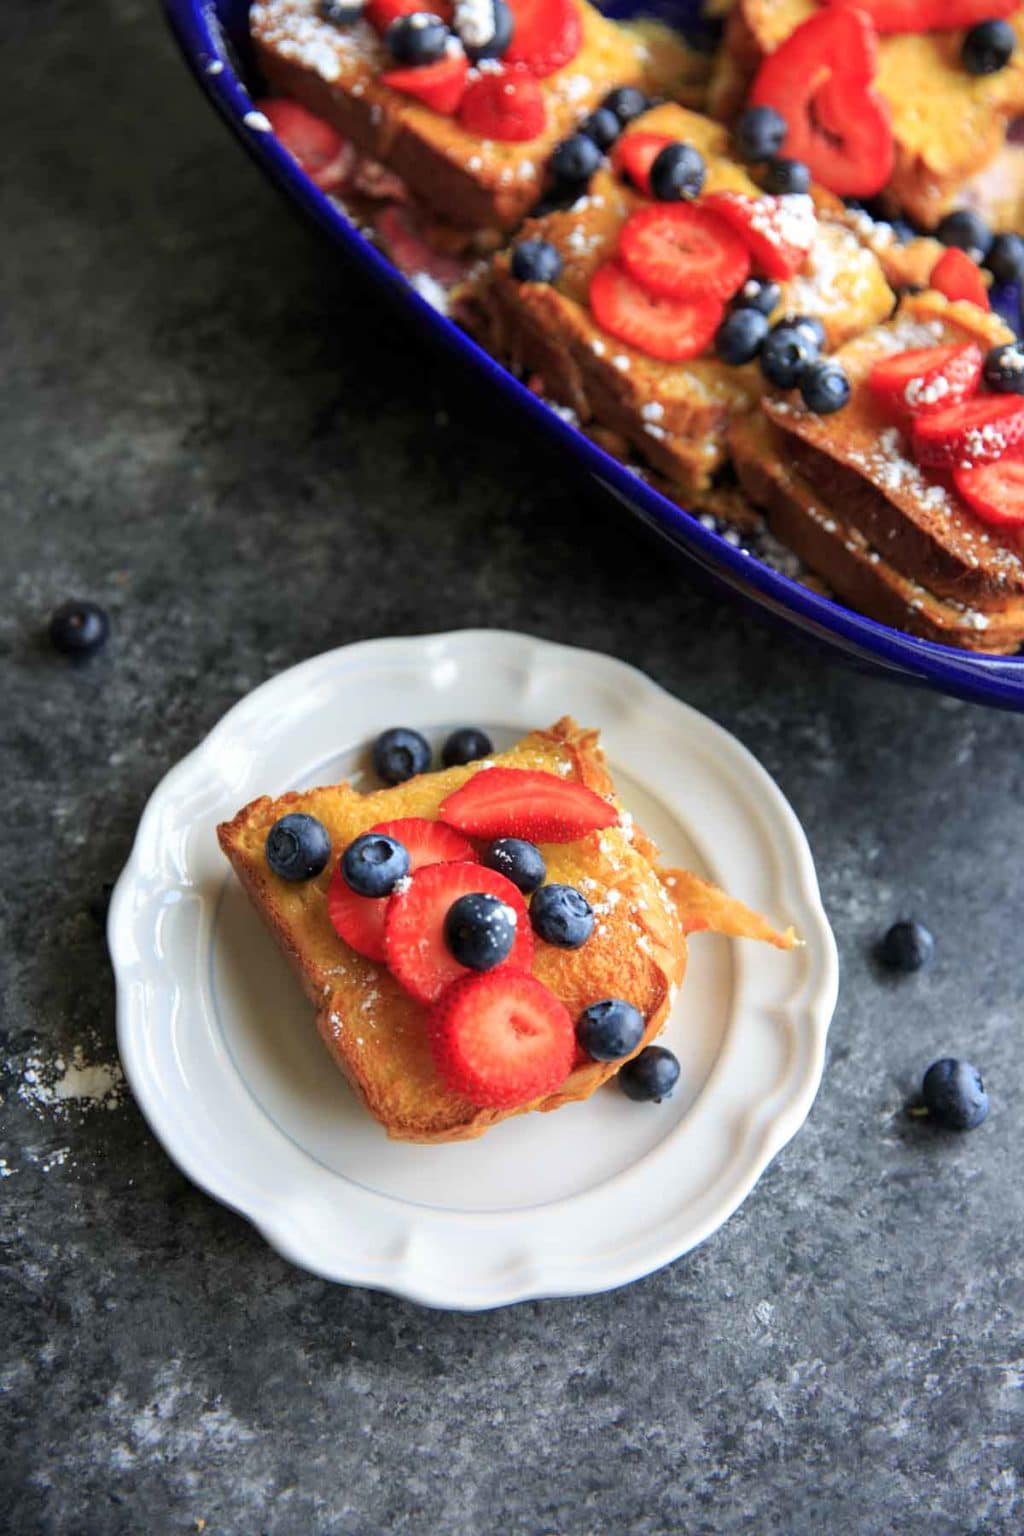 Summer Berry Stuffed French Toast Casserole Bake. Stuffed with cream cheese, fruit jam, strawberries and blueberries and topped with more berries! Serve with a sprinkle of powdered sugar and/or maple syrup if desired. Breakfast or brunch is served! Picture shows one serving of the french toast sandwich.